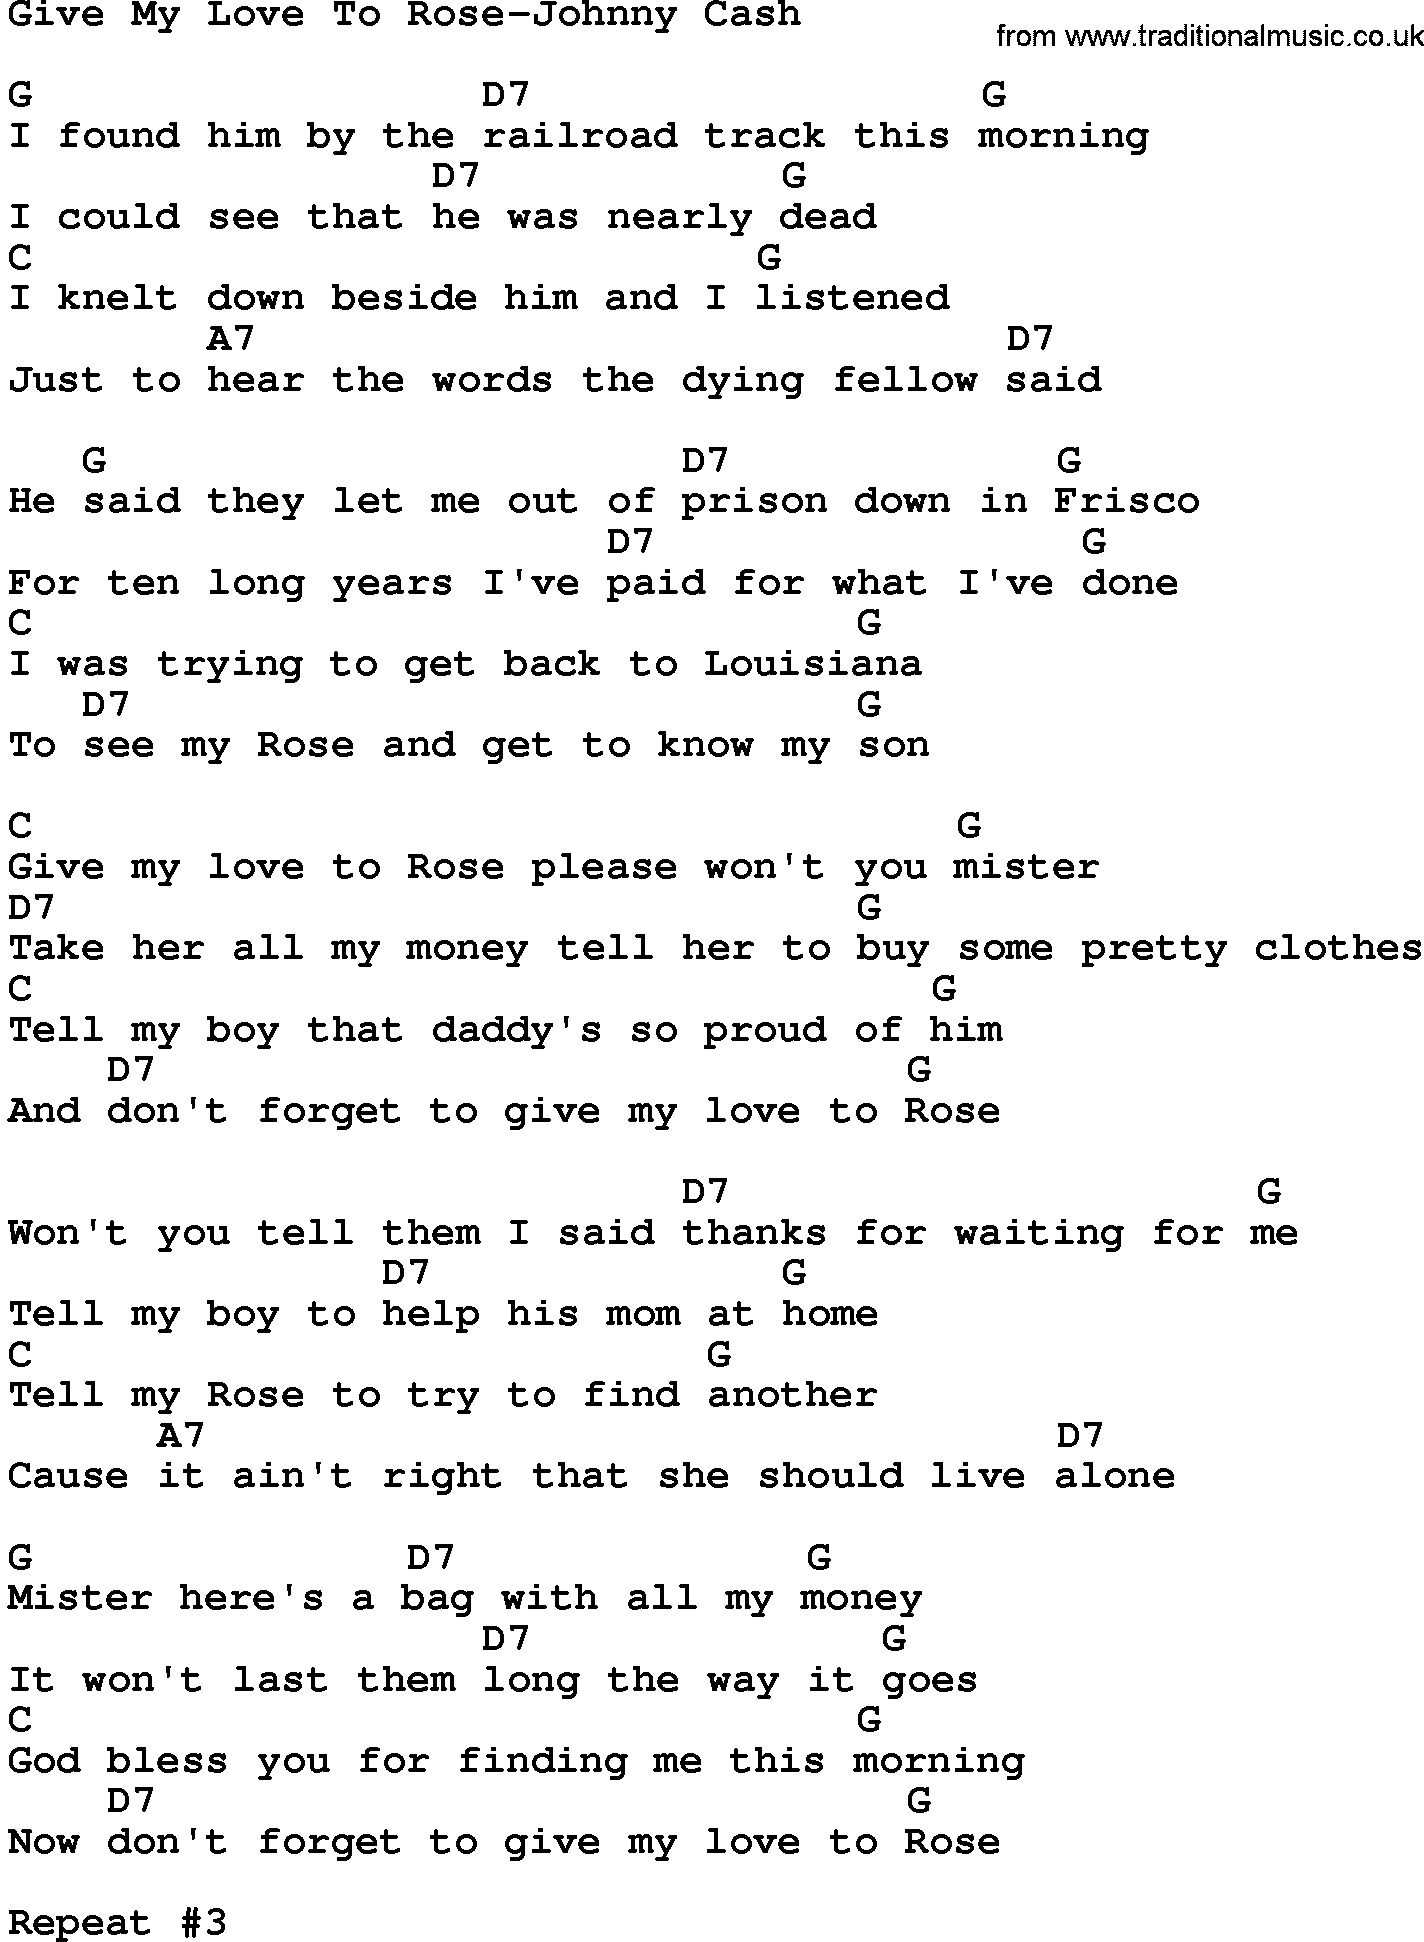 Country music song: Give My Love To Rose-Johnny Cash lyrics and chords